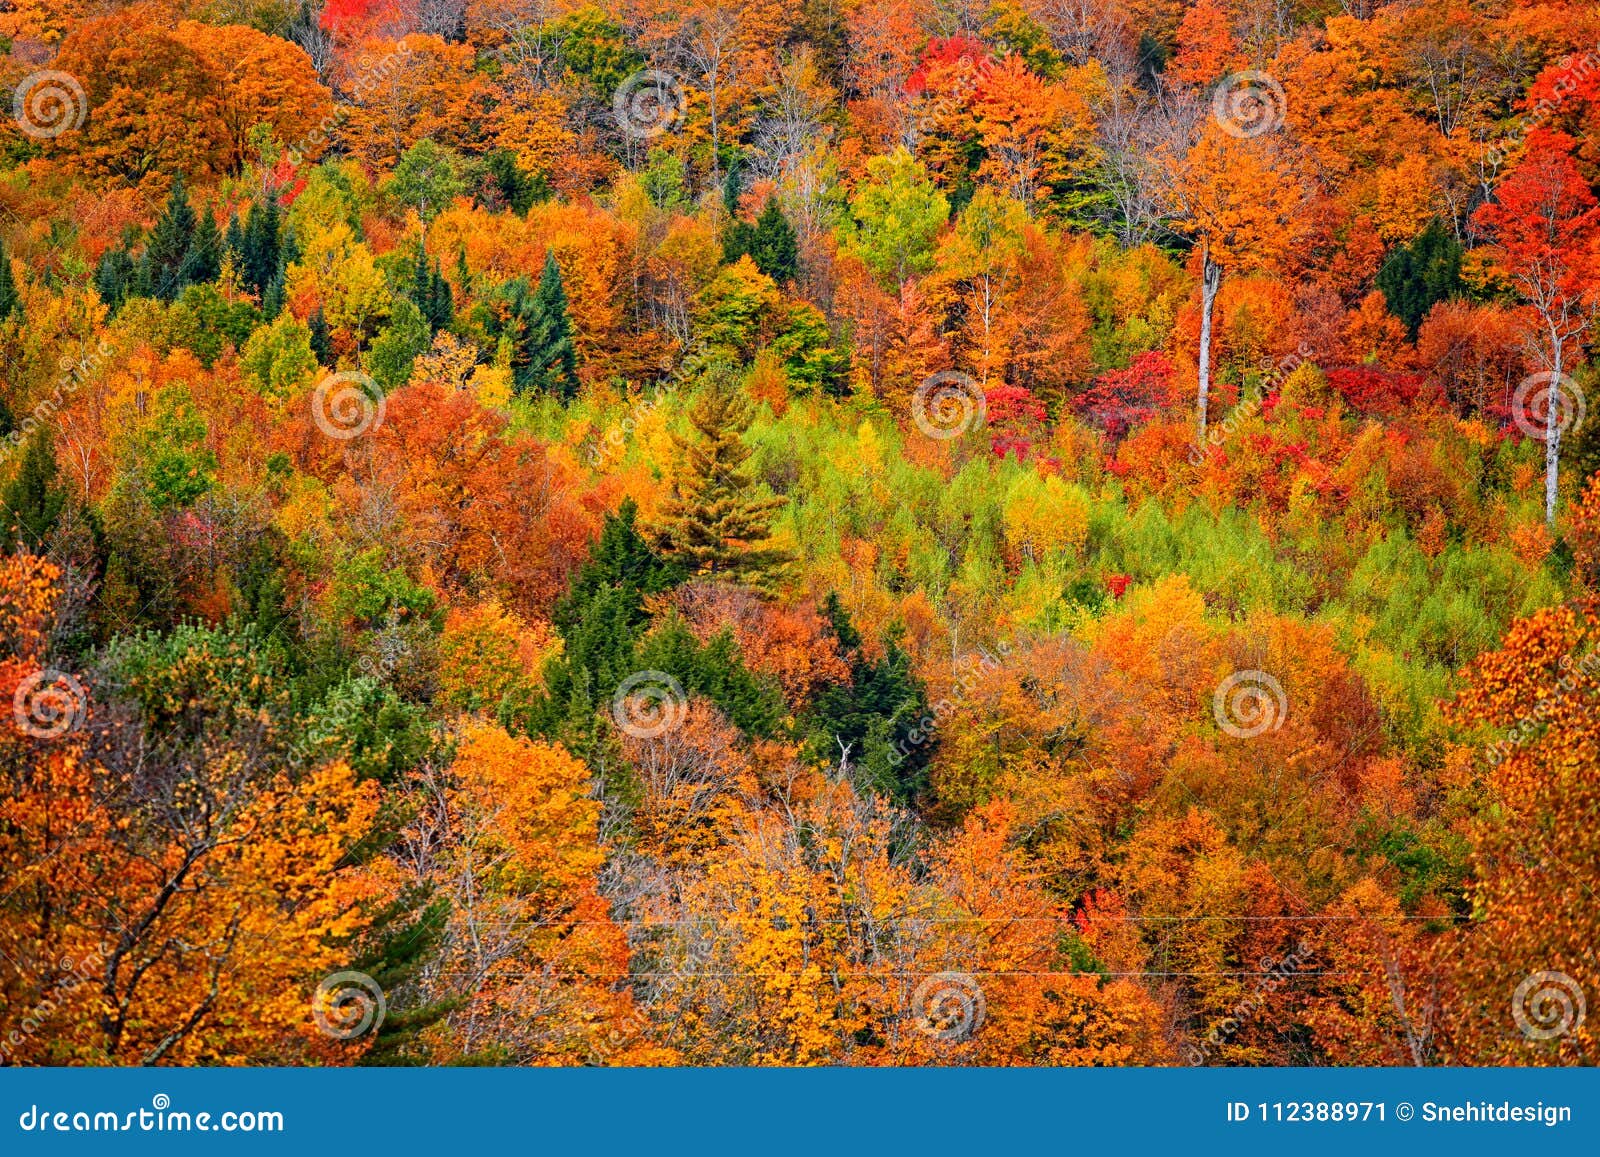 bright fall foliage in vermont mountains